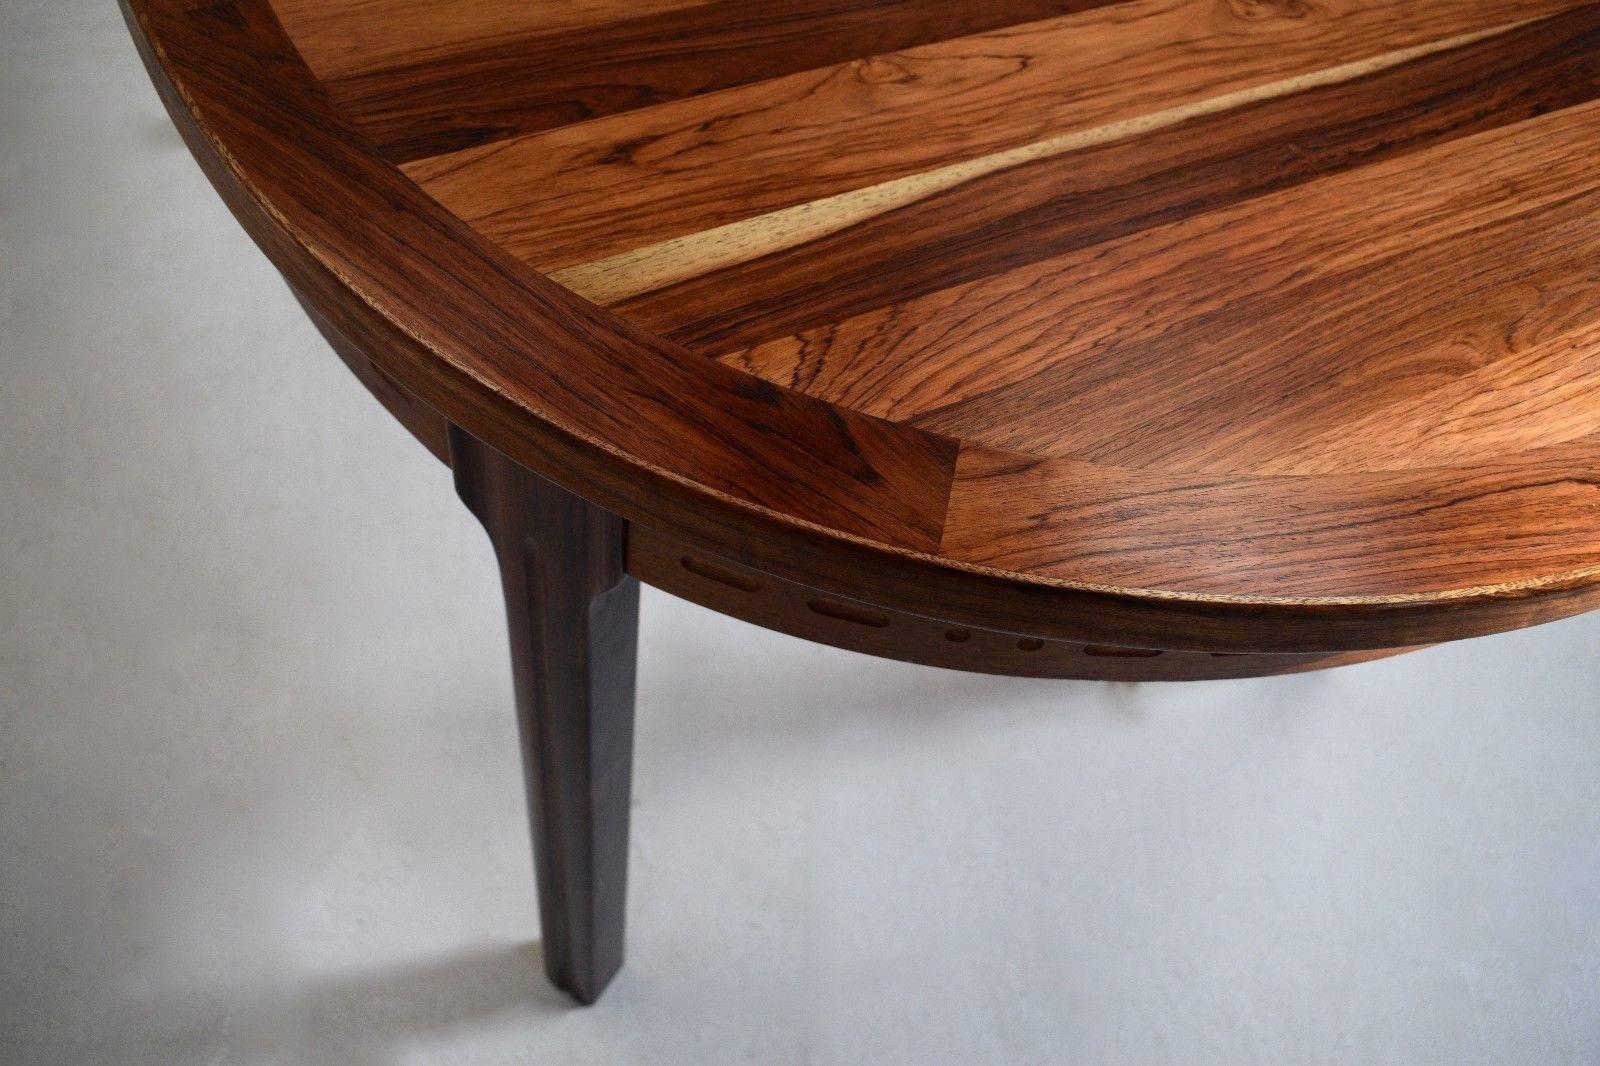 Swedish Nils Jonsson Rosewood Oval Dining Table Midcentury, 1960s For Sale 4